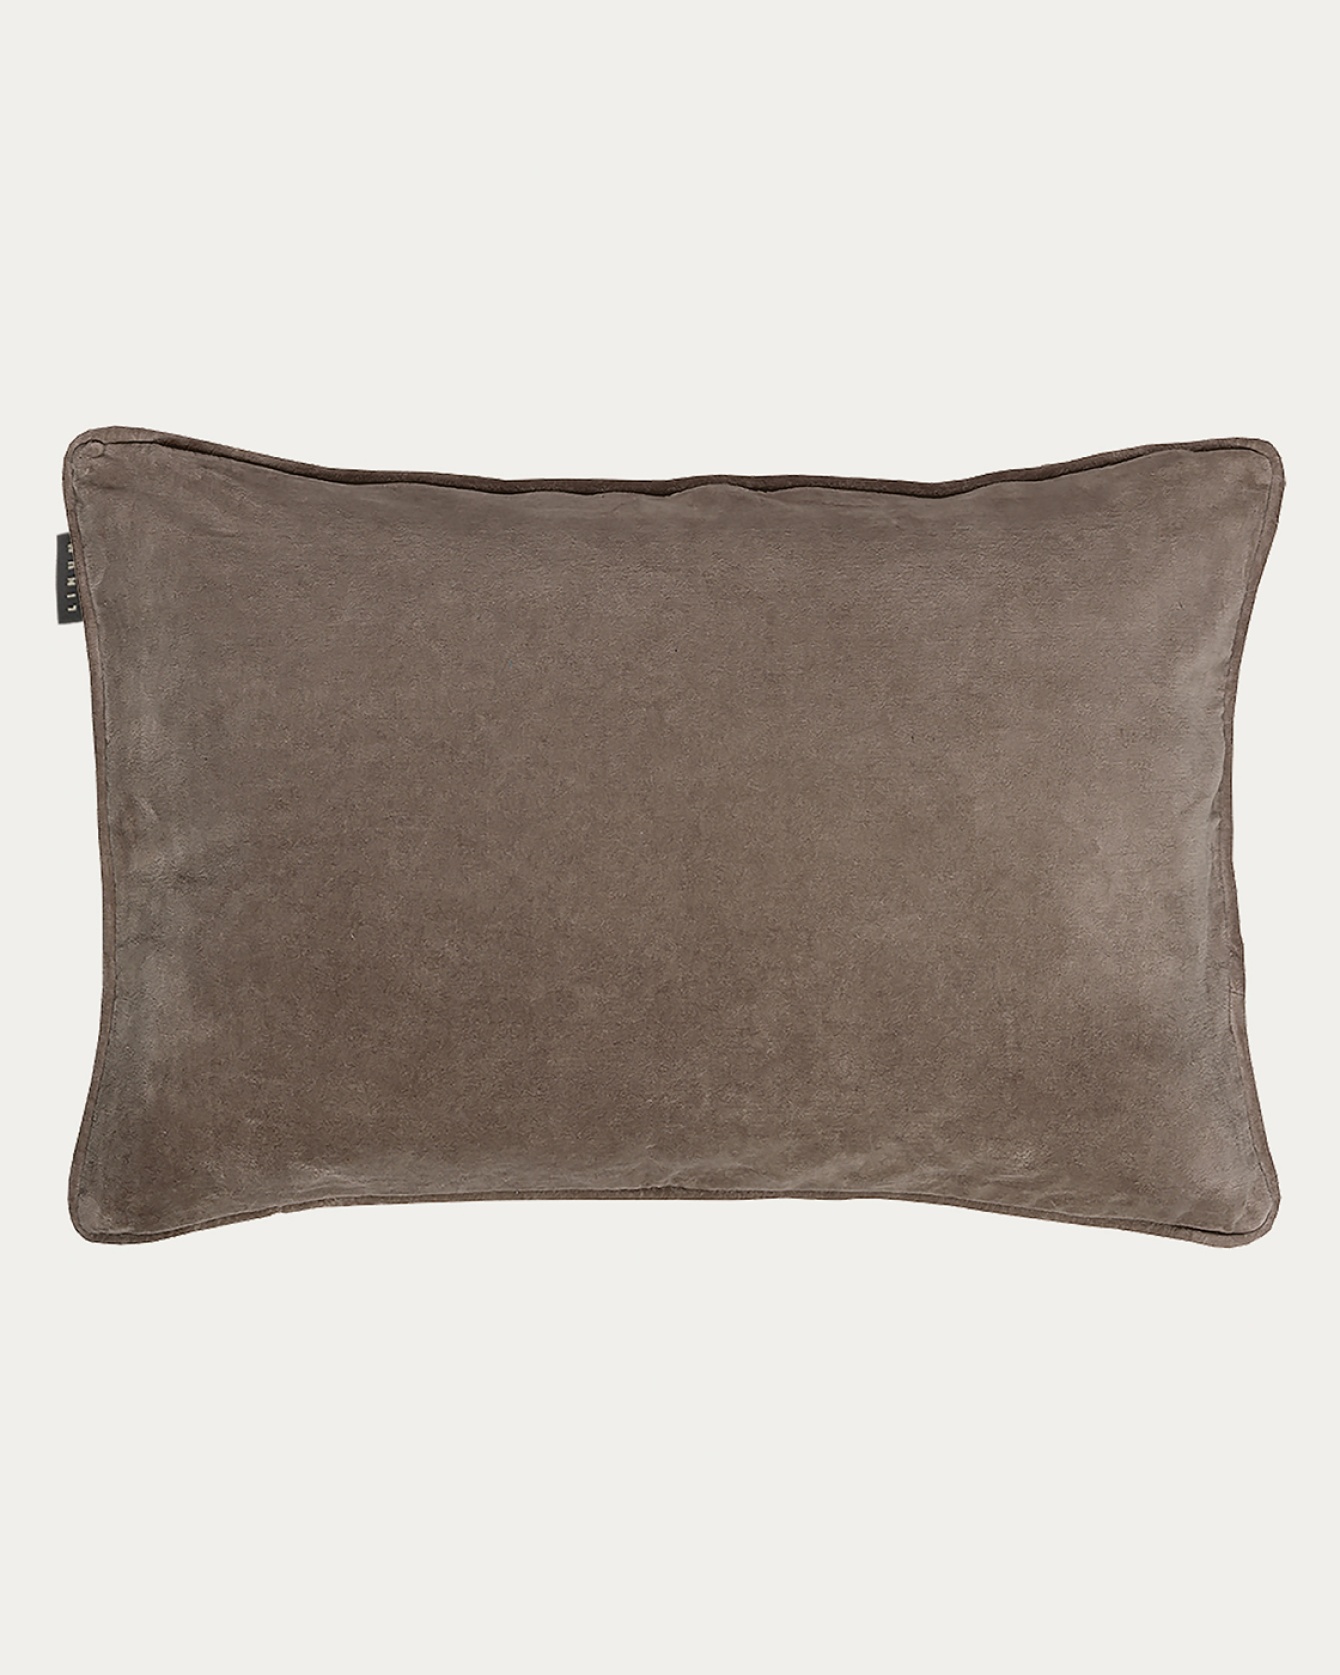 Product image mole brown PAOLO cushion cover in soft organic cotton velvet from LINUM DESIGN. Size 40x60 cm.